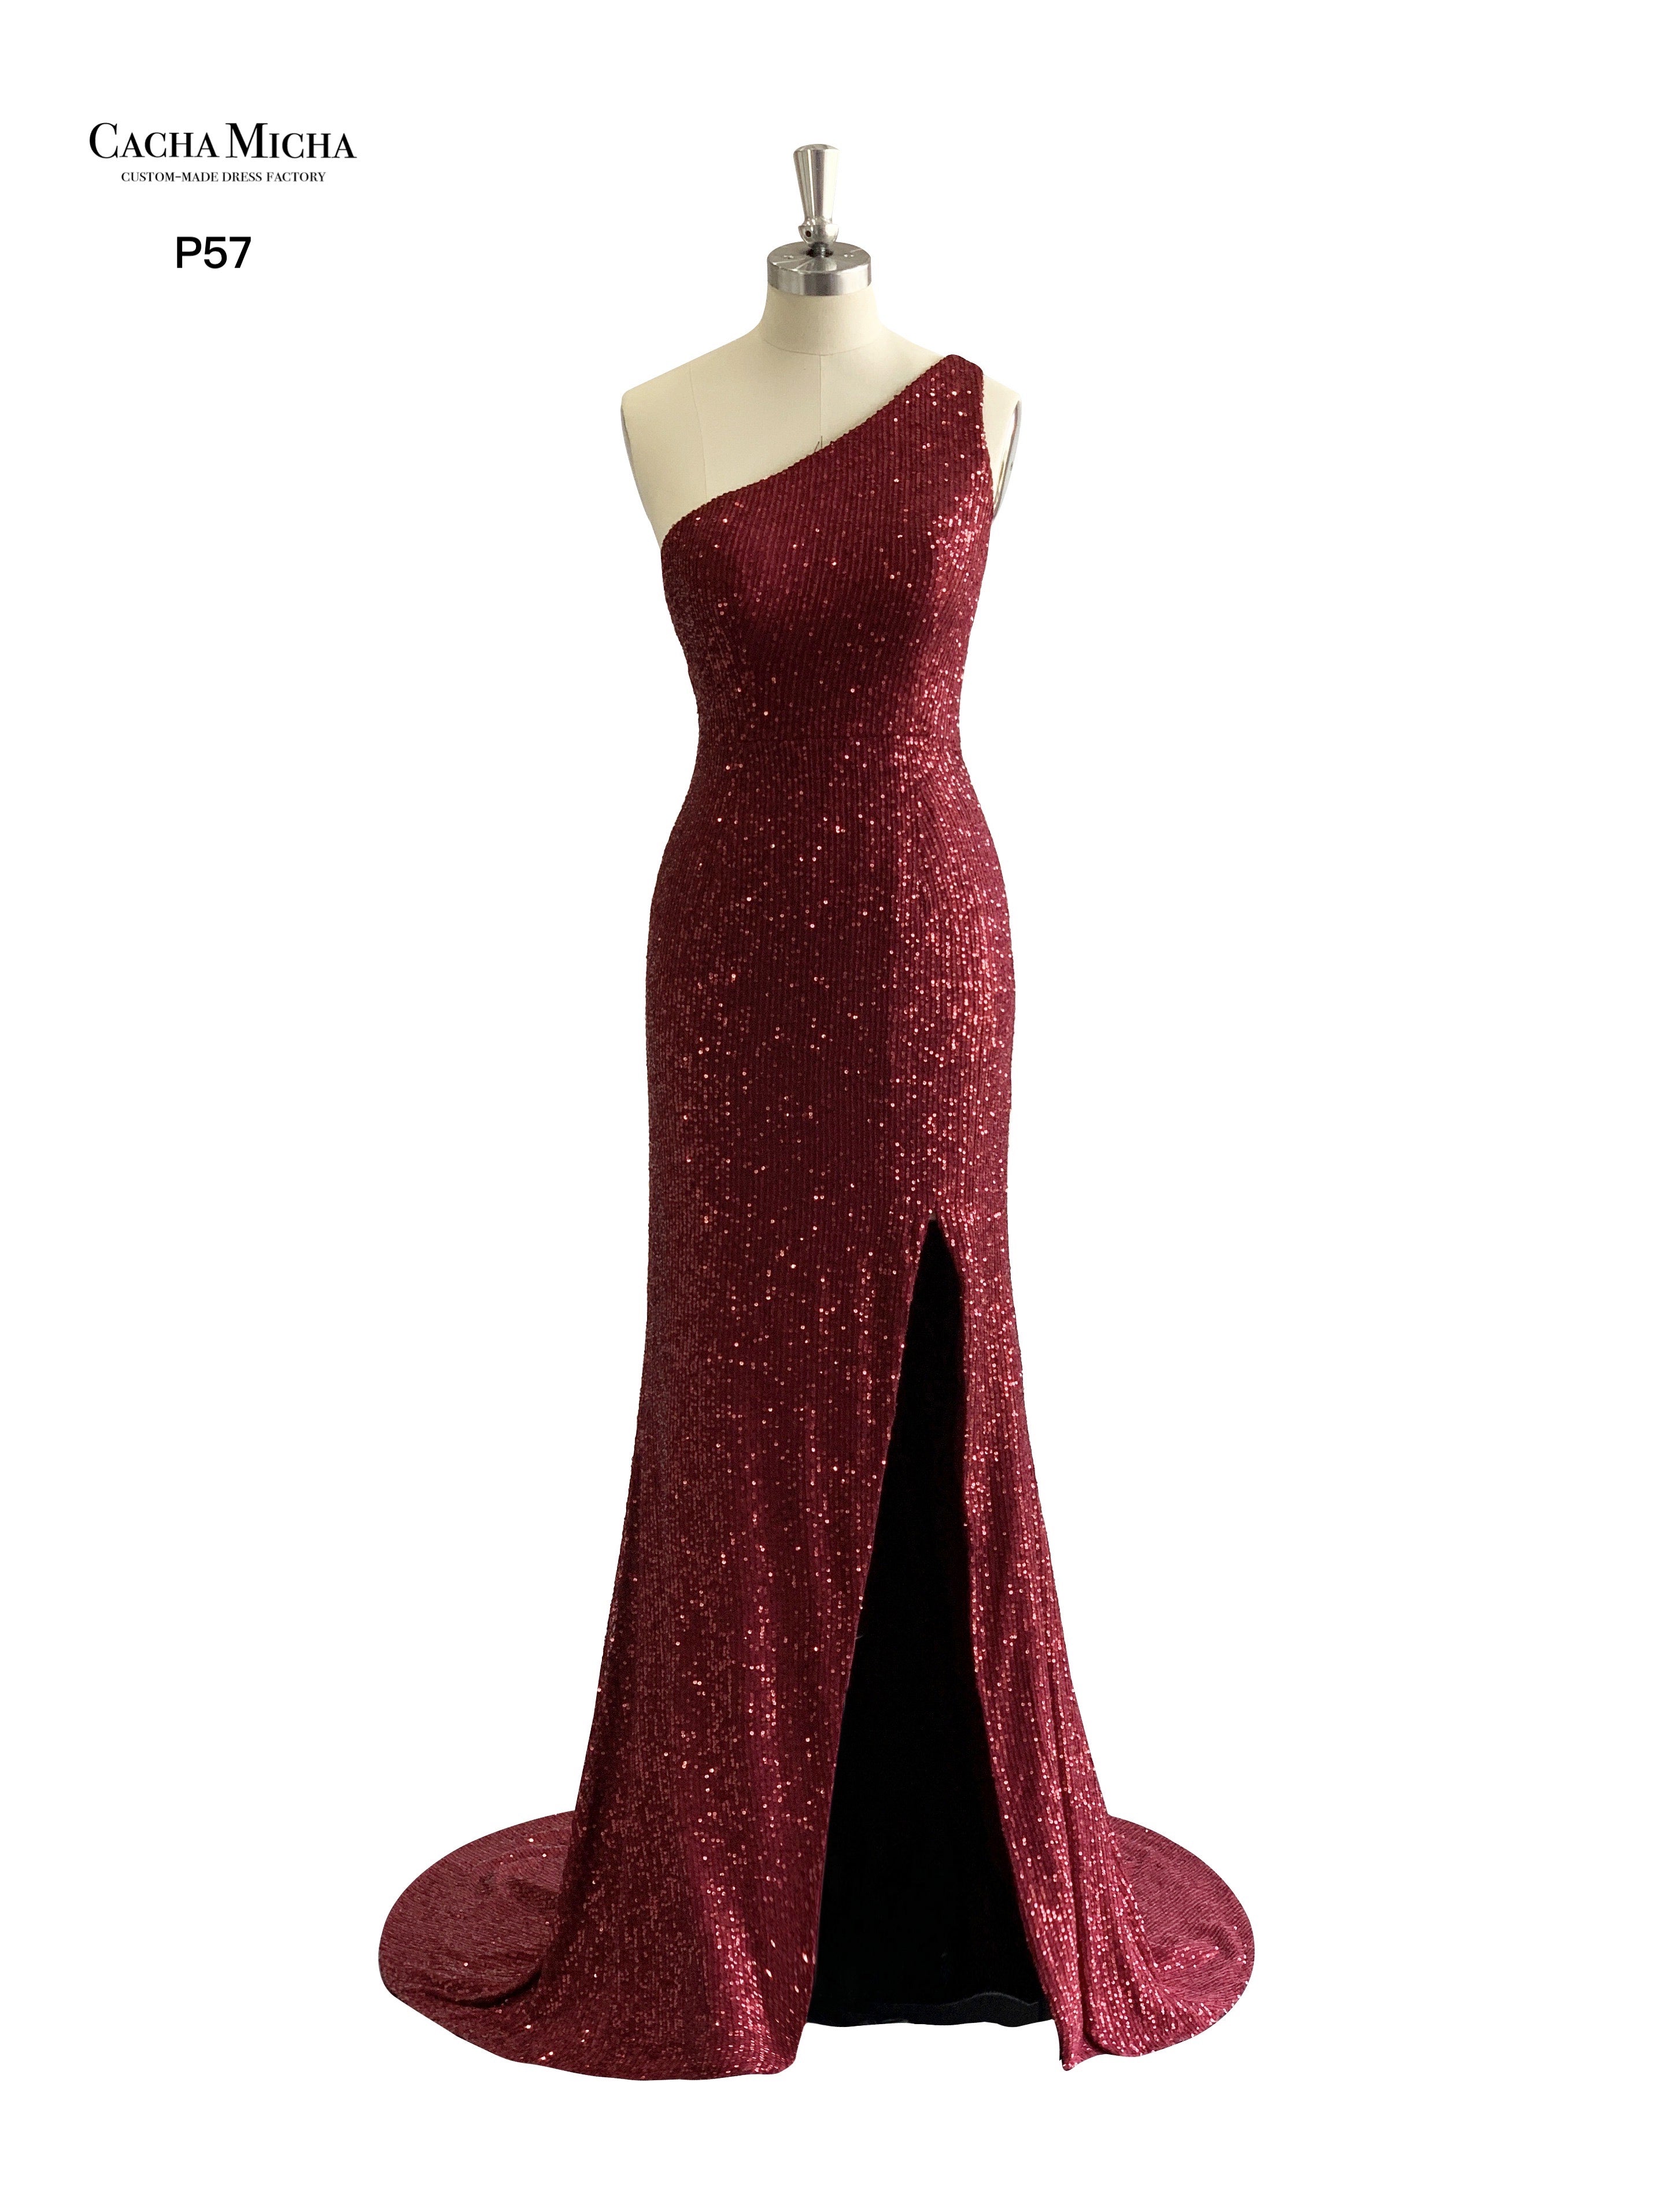 One Shoulder Wine Red Sequin Prom Dress P57